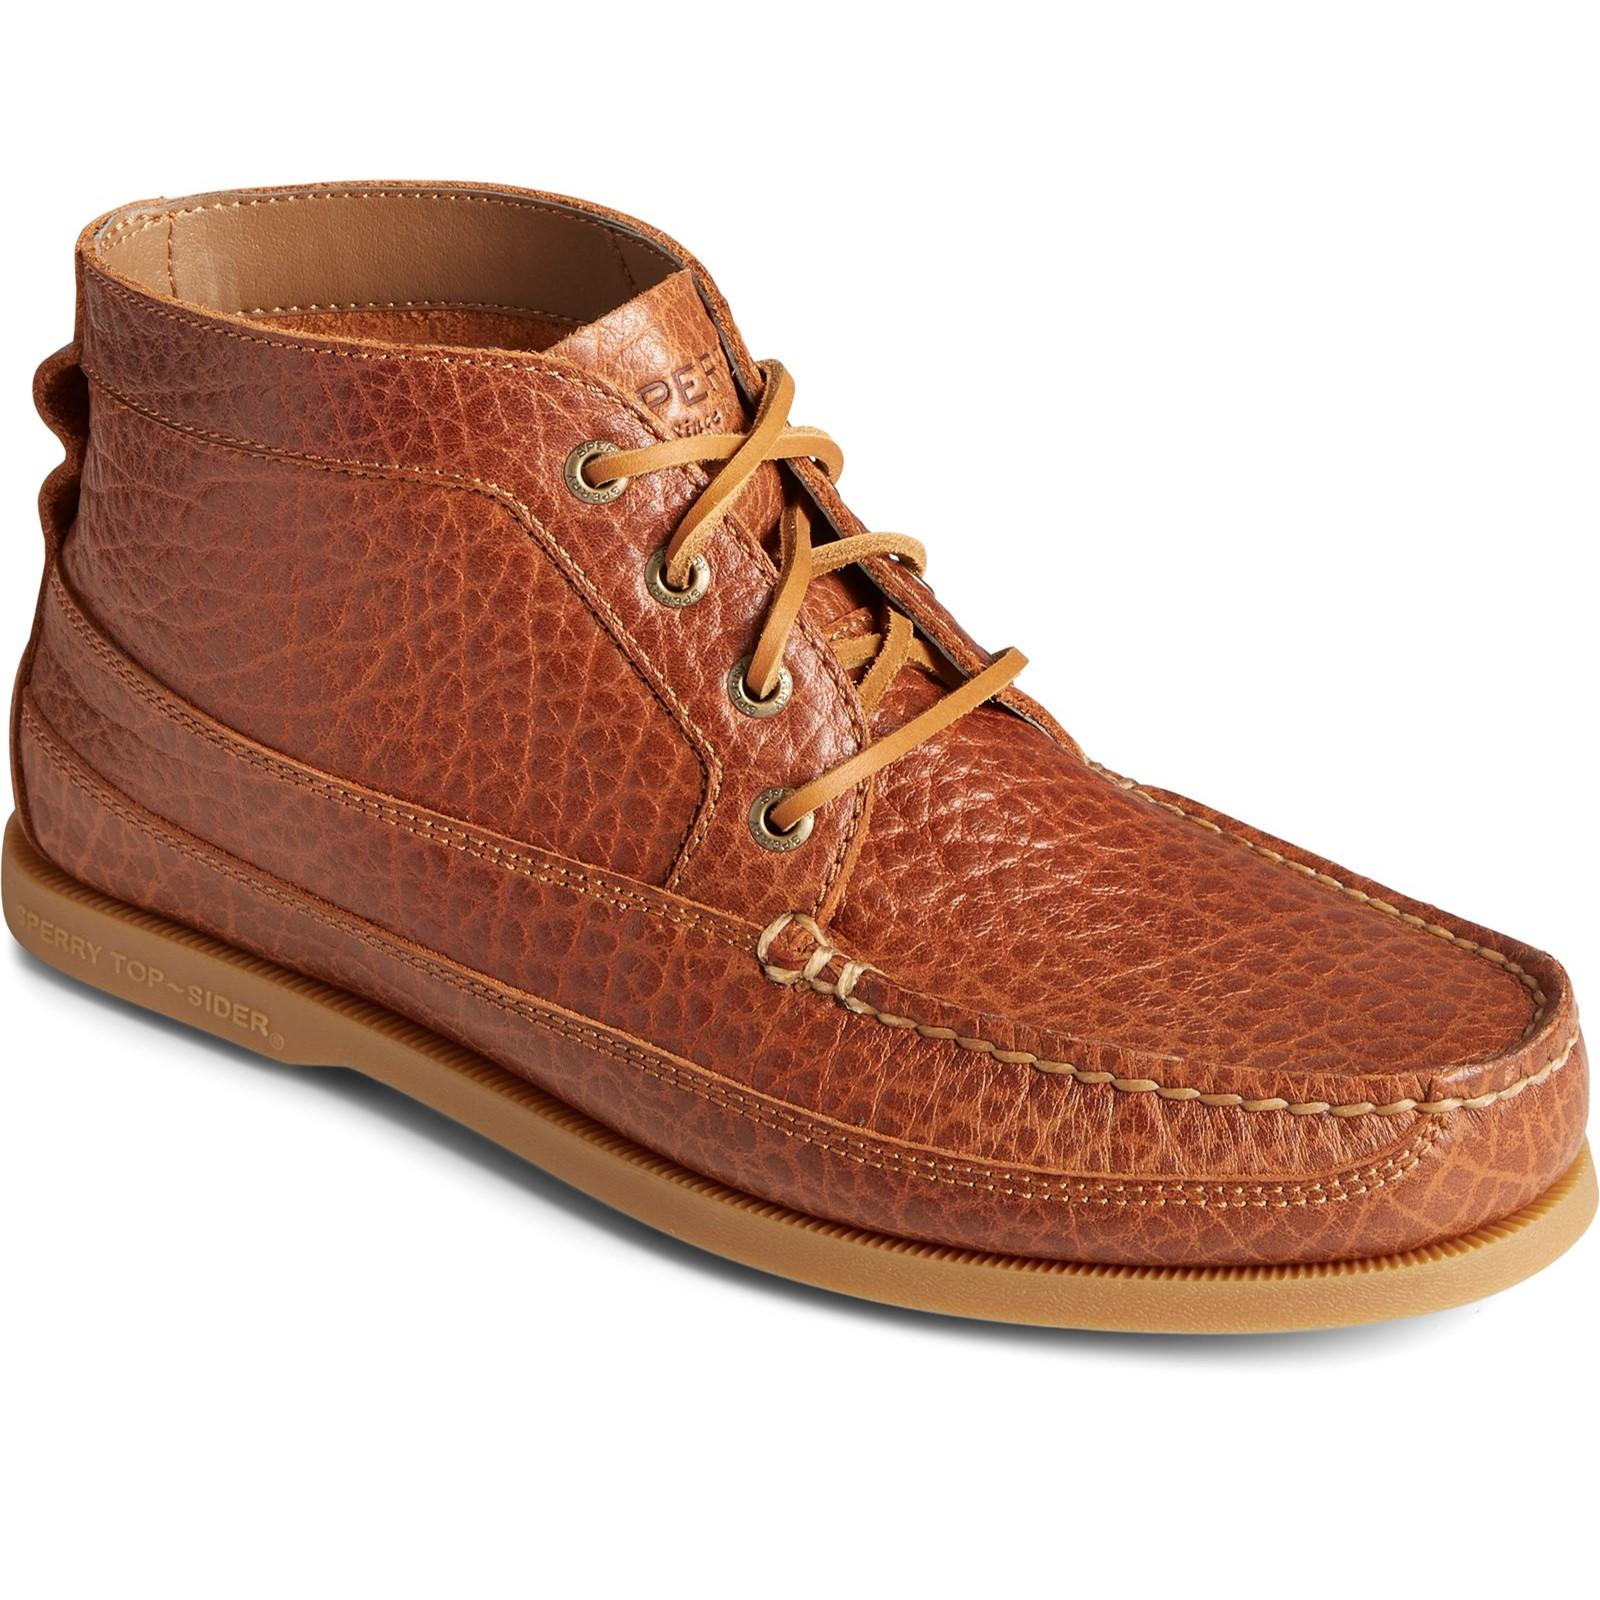 Sperry Authentic Original Boat Chukka Tumbled Boots